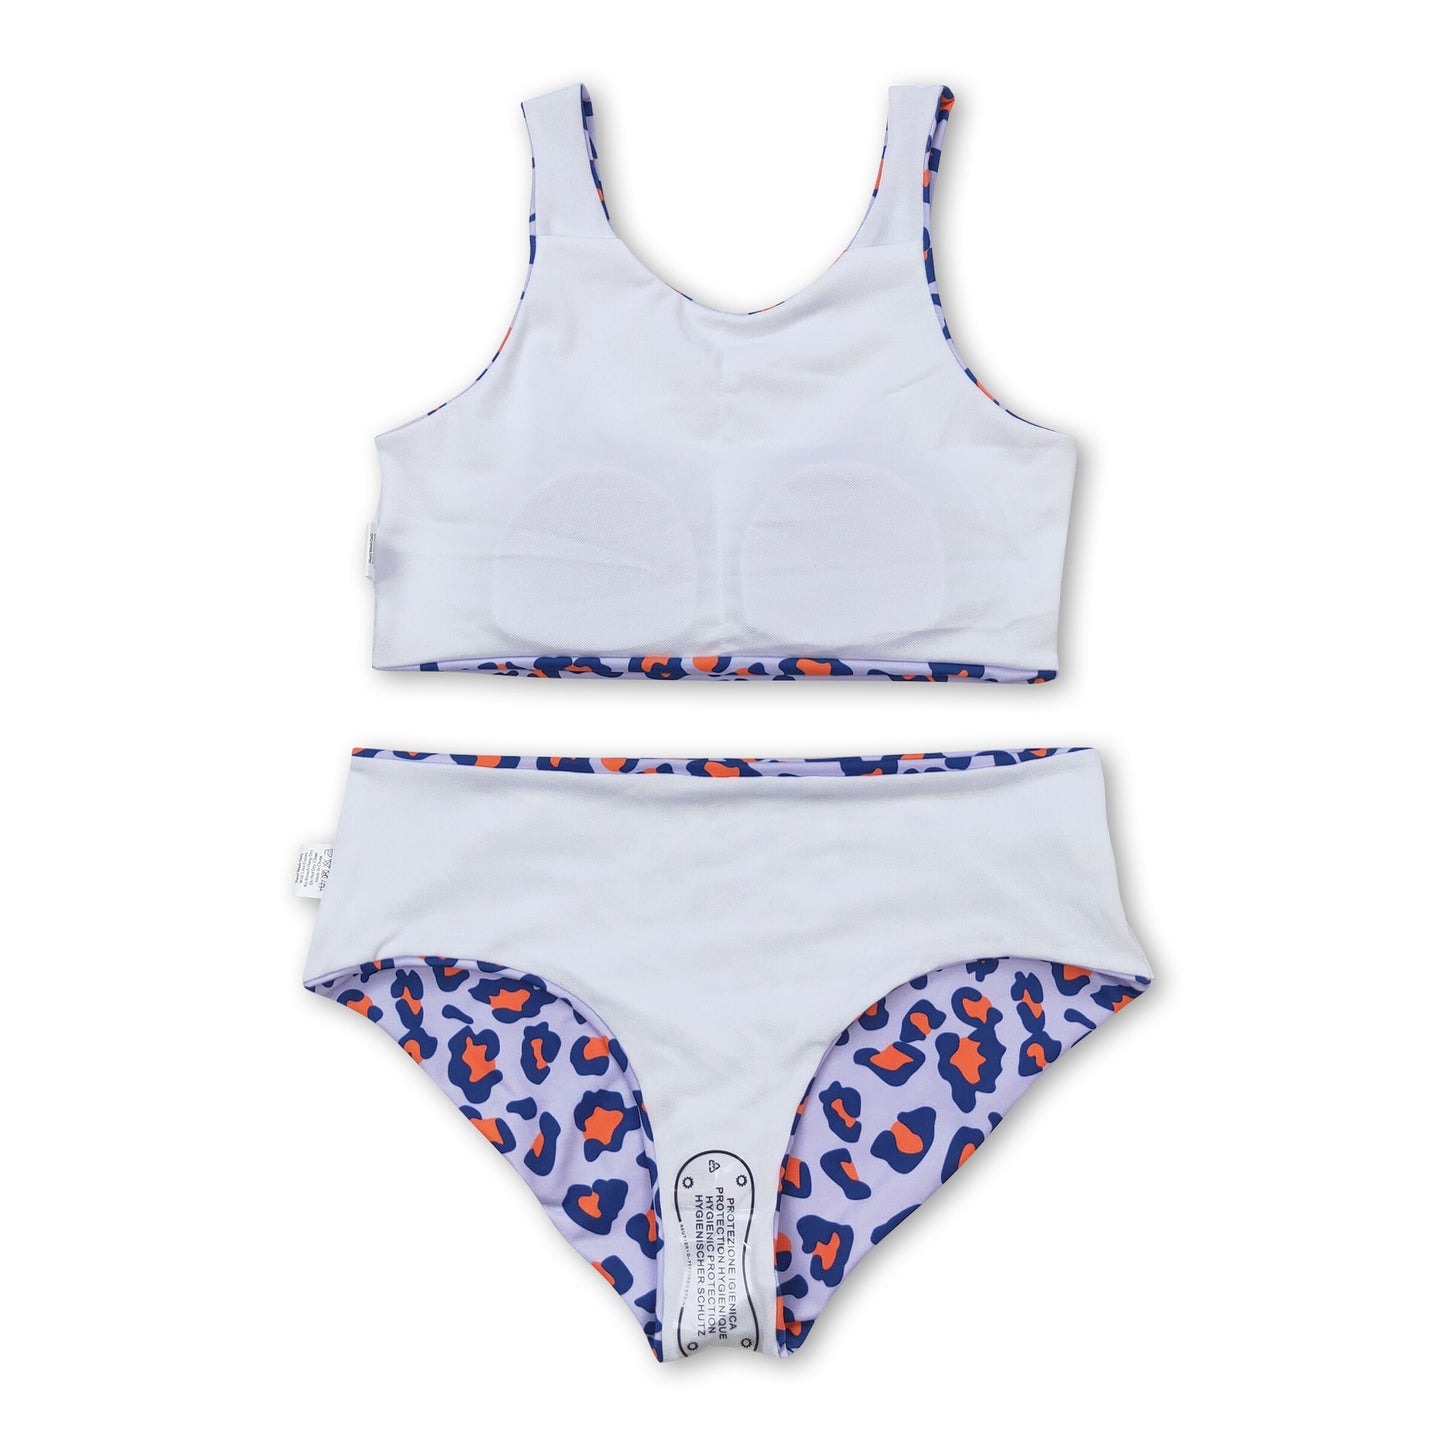 Sleeveless red blue leopard girls 4th of july swimsuit